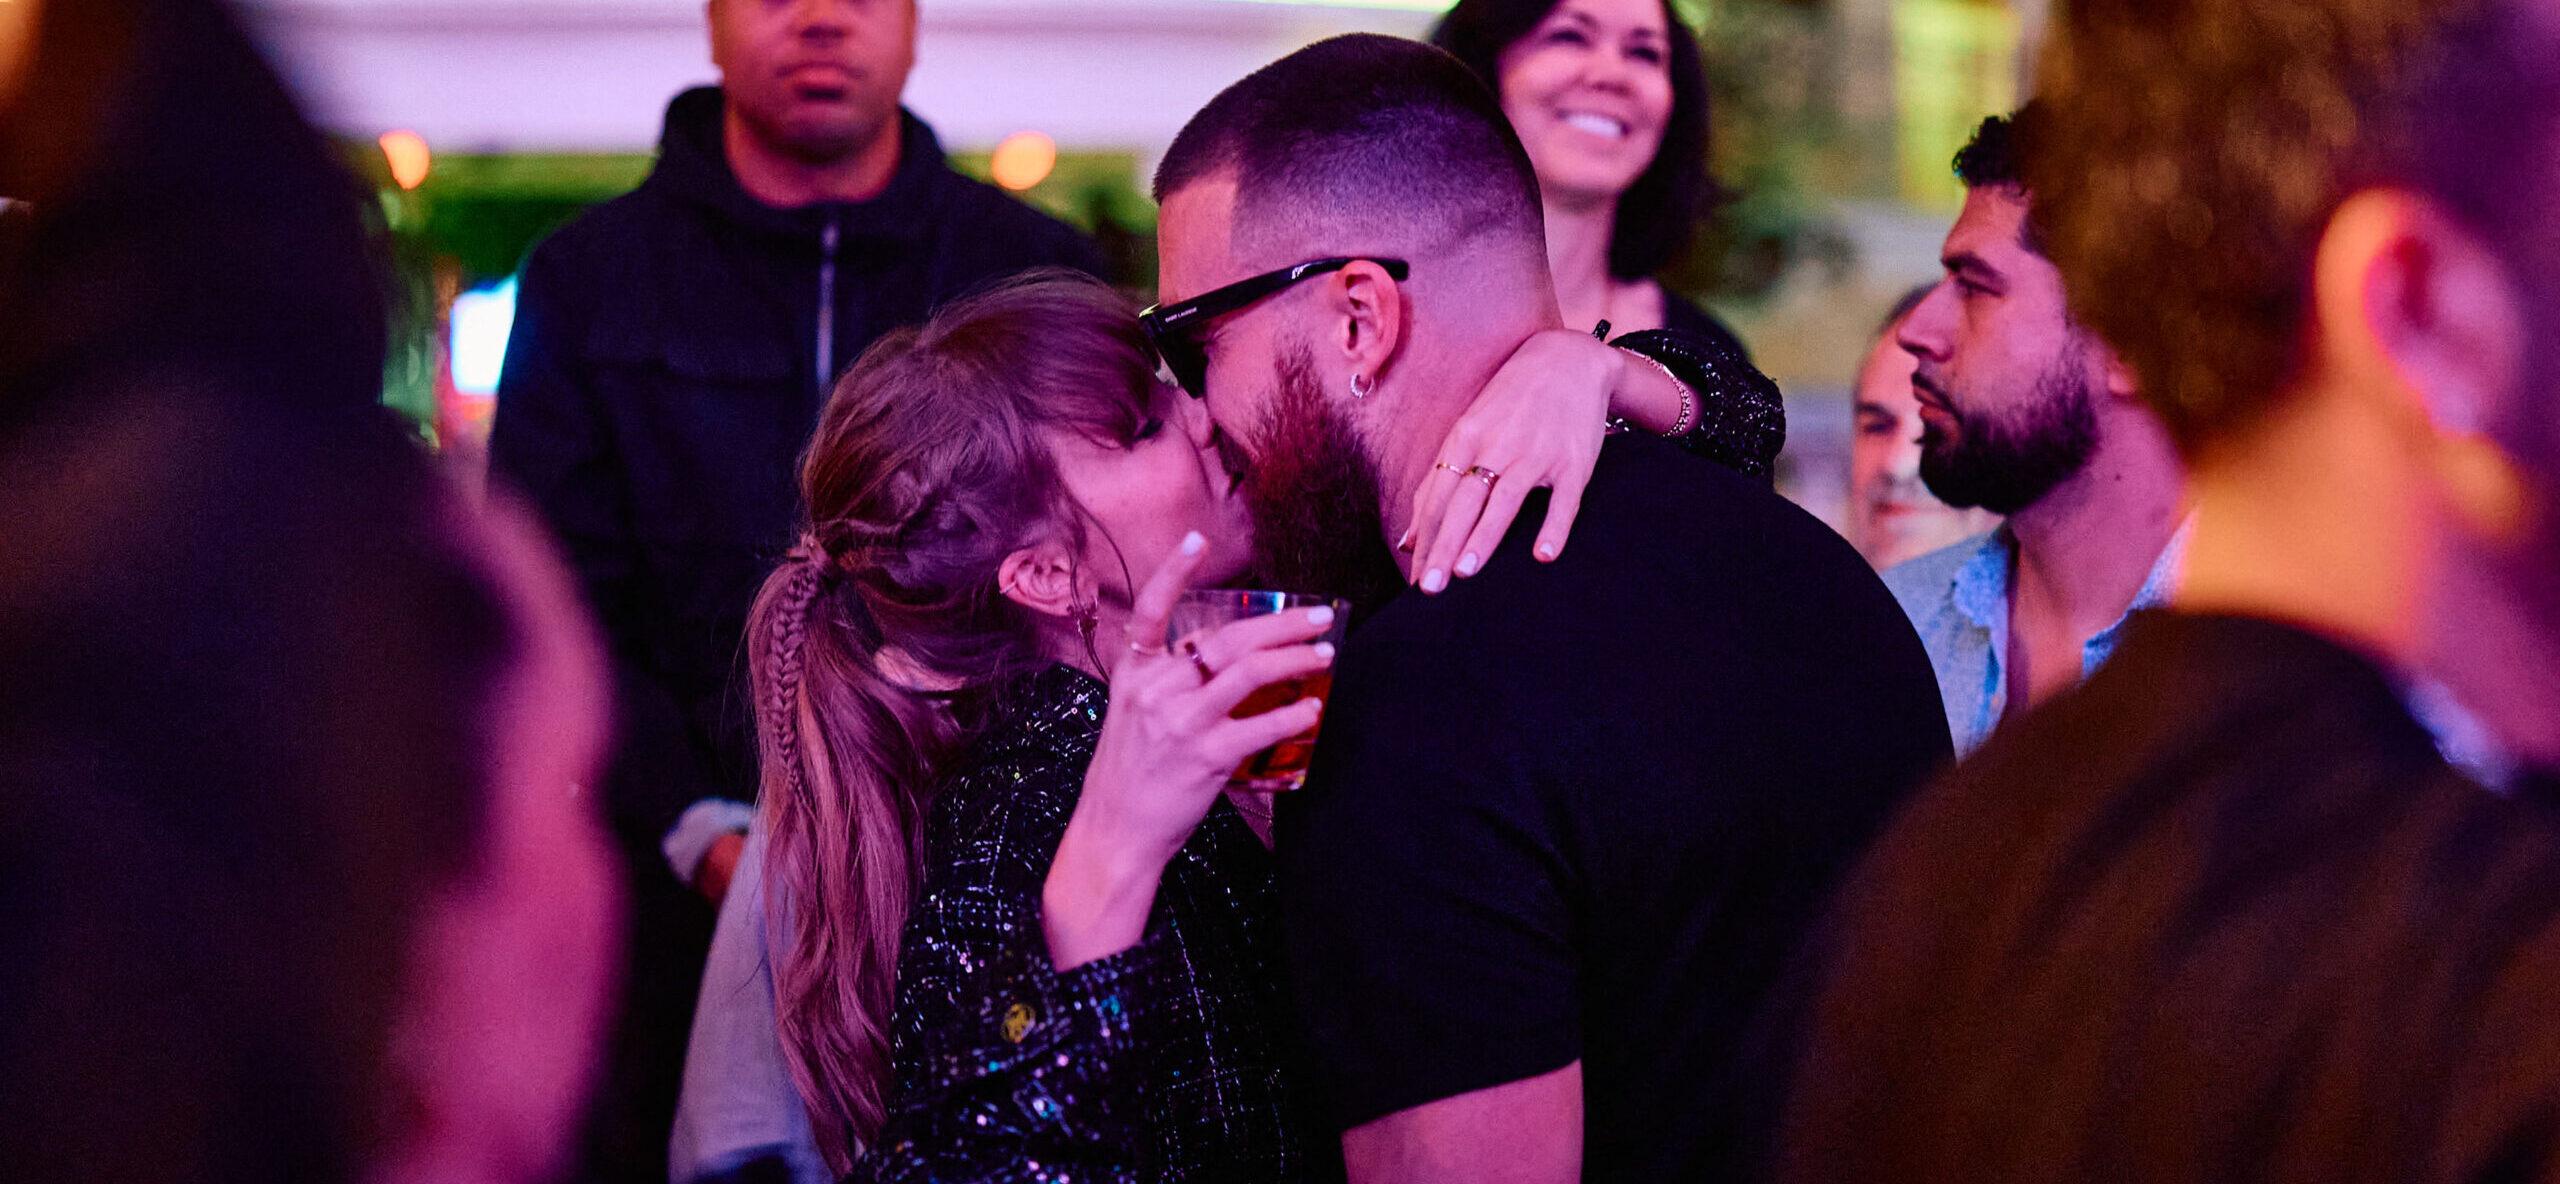 Travis Kelce ‘Protective’ Of ‘Glowing’ Taylor Swift At L.A. Party